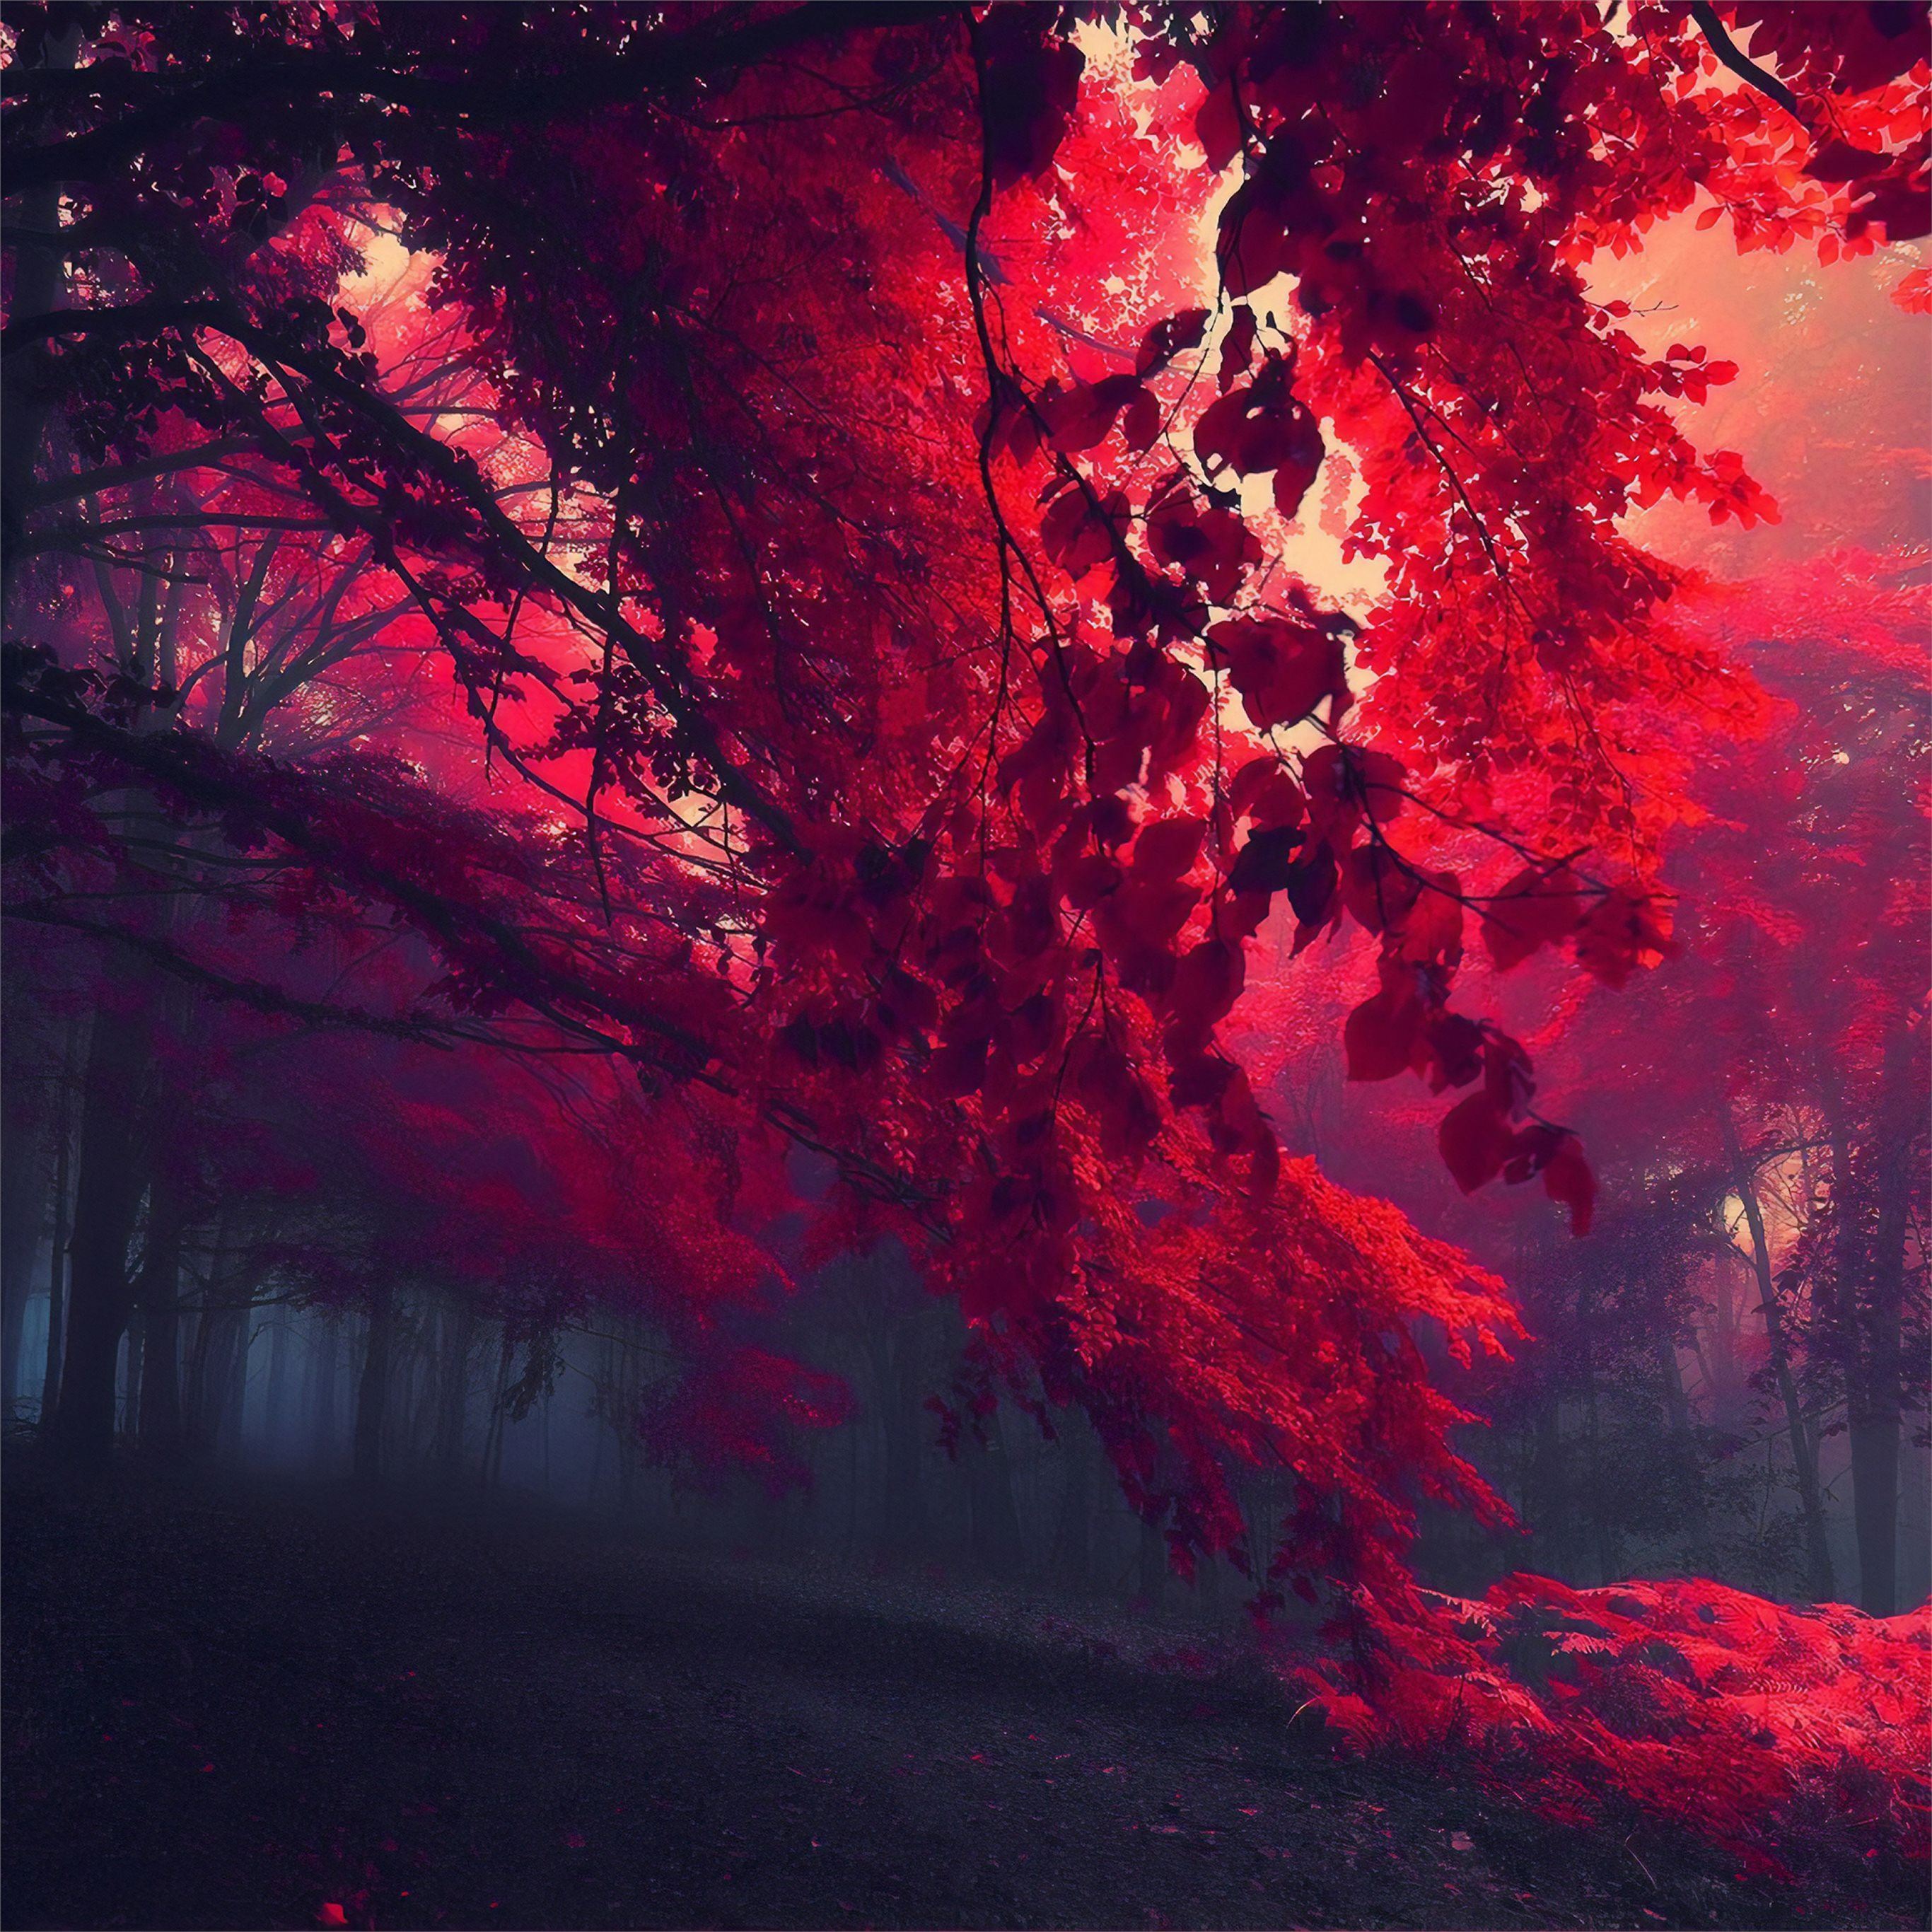 Dark Red Autumn Forest Ipad Pro Wallpapers Free Download